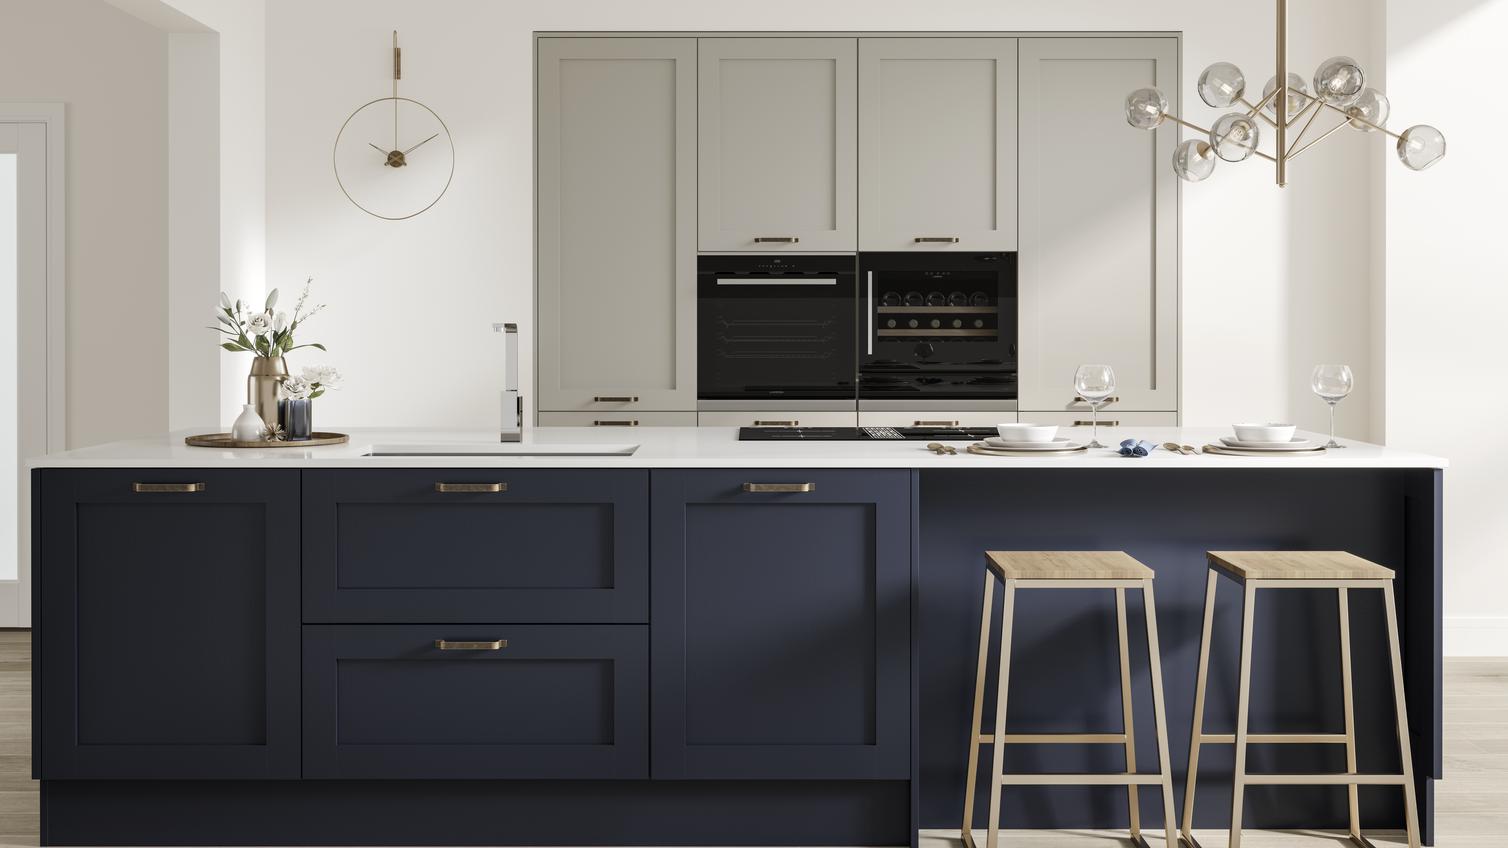 A mix and match blue kitchen idea with cream units and a navy island. Has shaker doors, timber floors, and a breakfast bar.